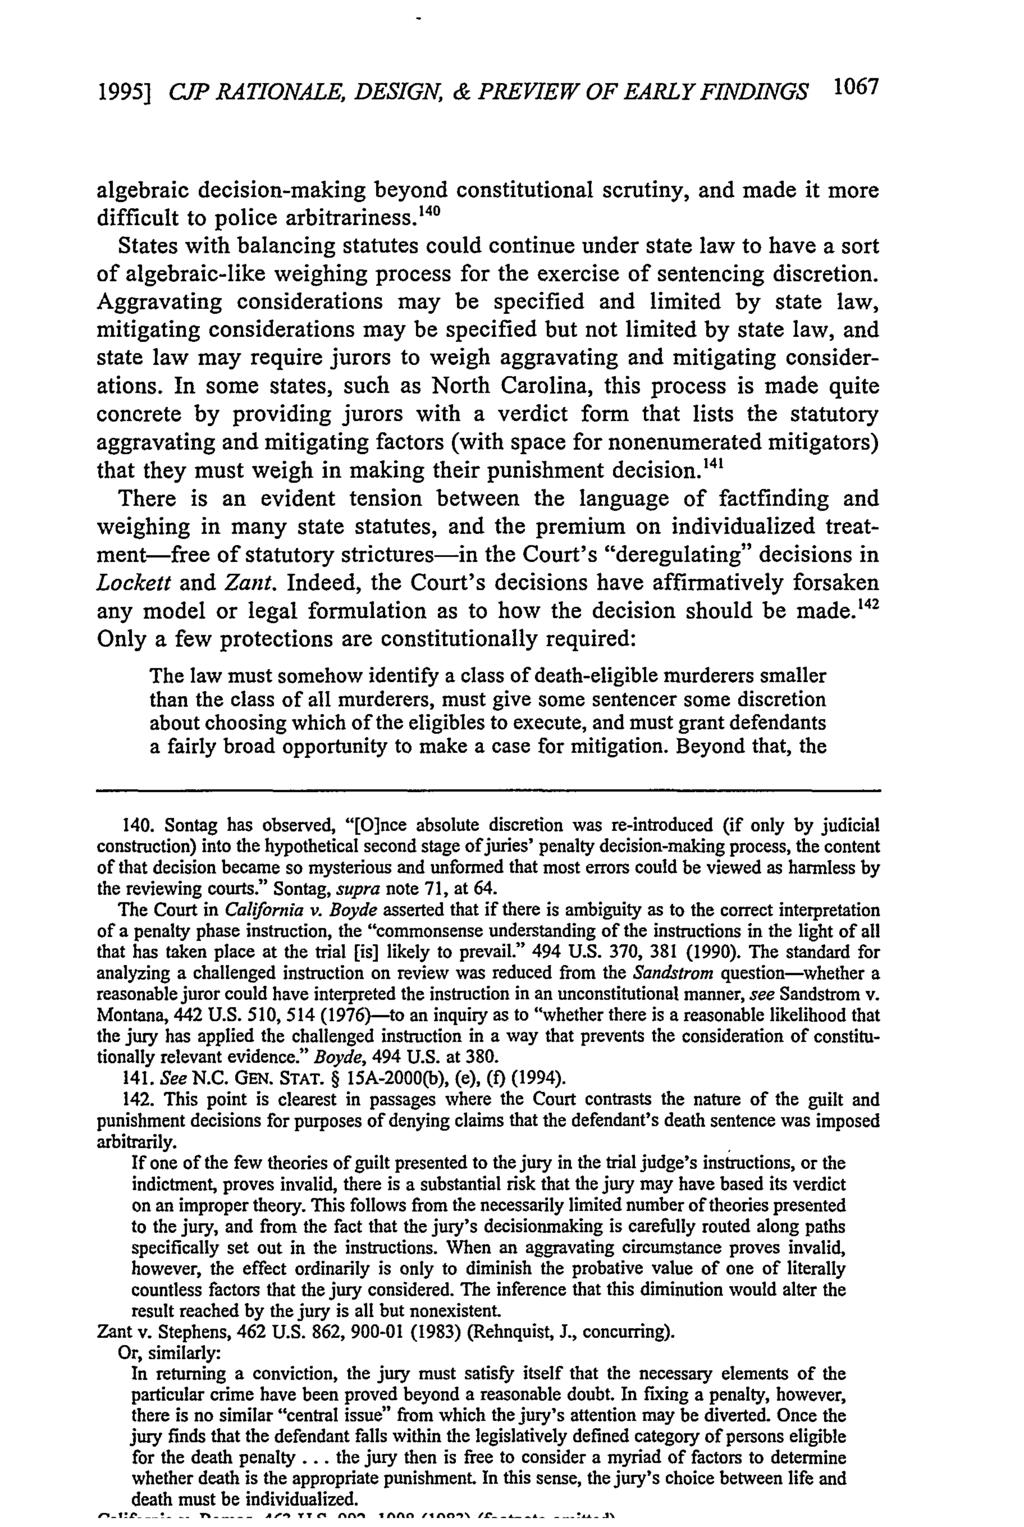 1995] Cjp RATIONALE, DESIGN, & PREVIEW OF EARLY FINDINGS 1067 algebraic decision-making beyond constitutional scrutiny, and made it more difficult to police arbitrariness.